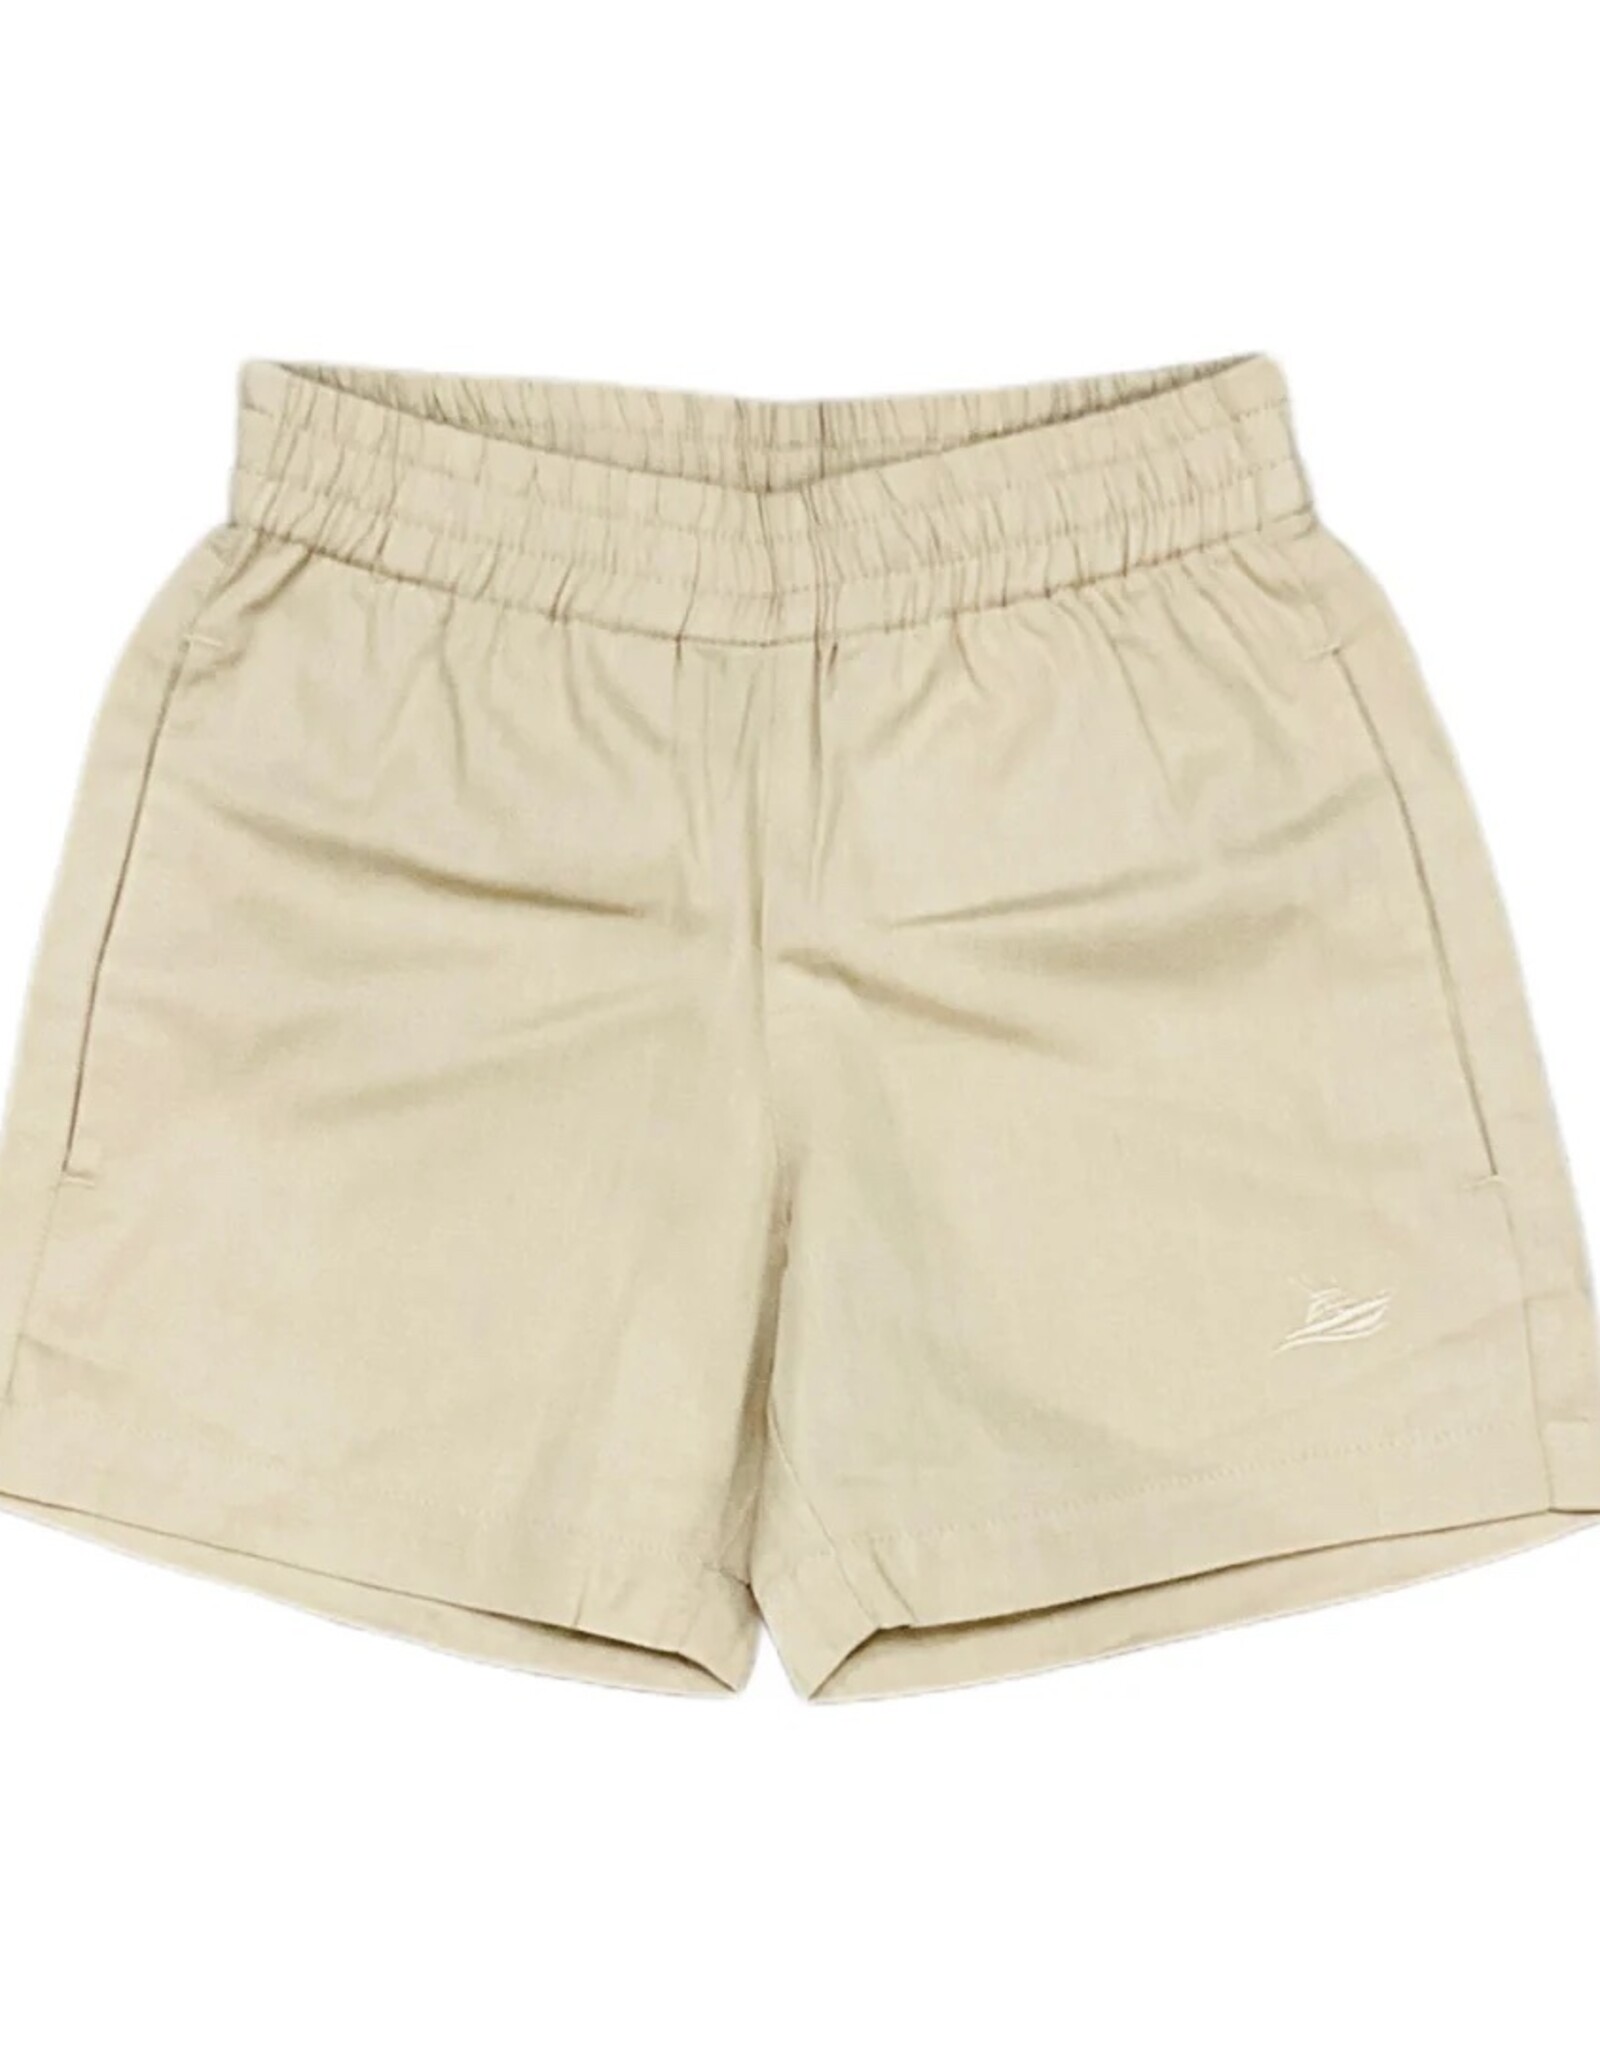 SouthBound Play Shorts Fog